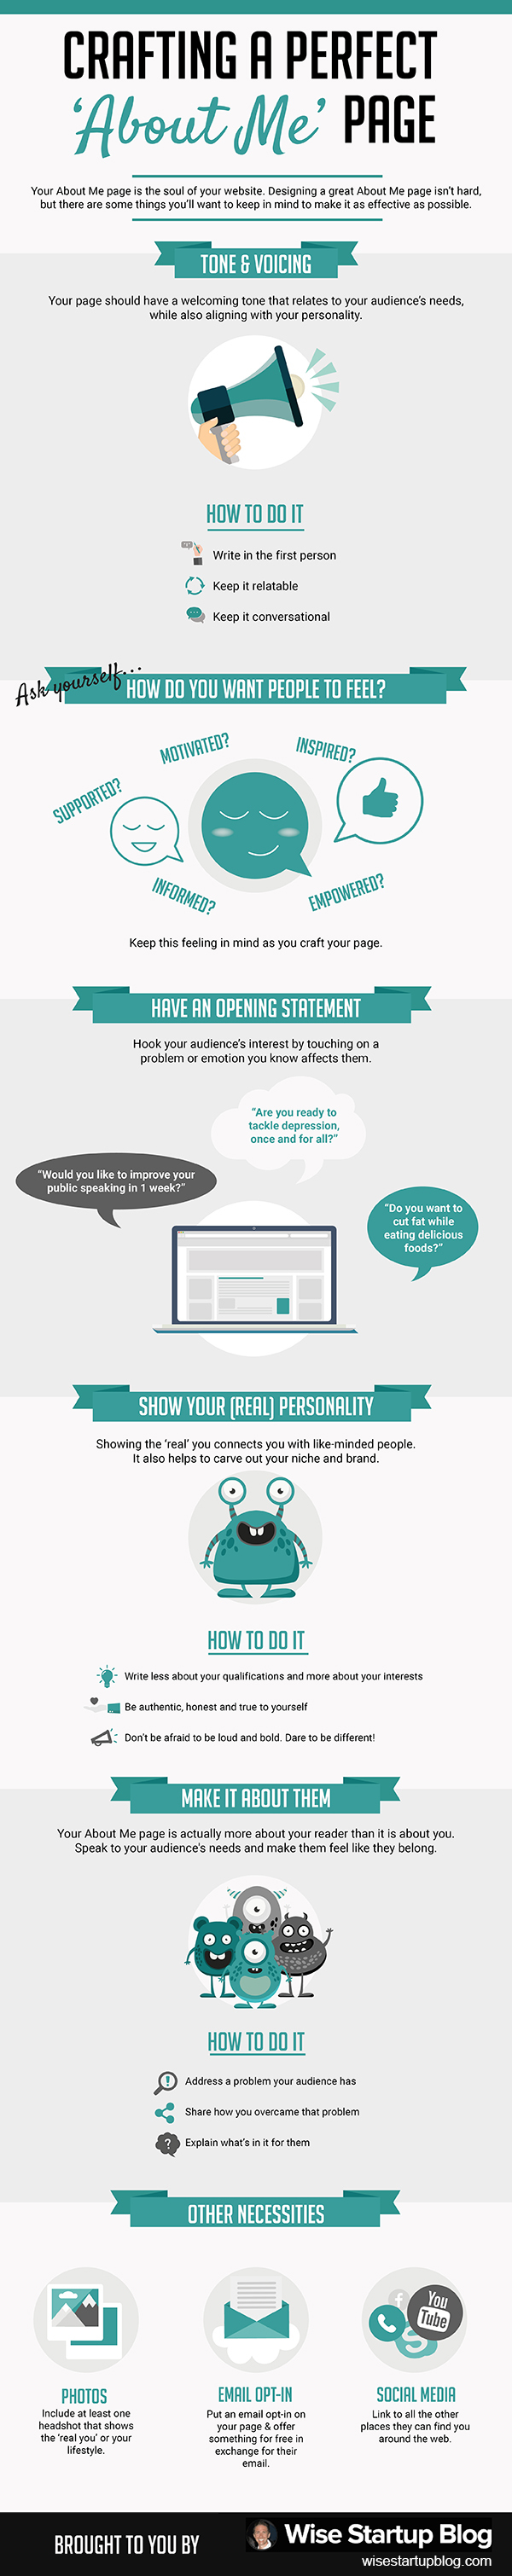 14-tips-to-create-the-perfect-about-me-page-for-your-website